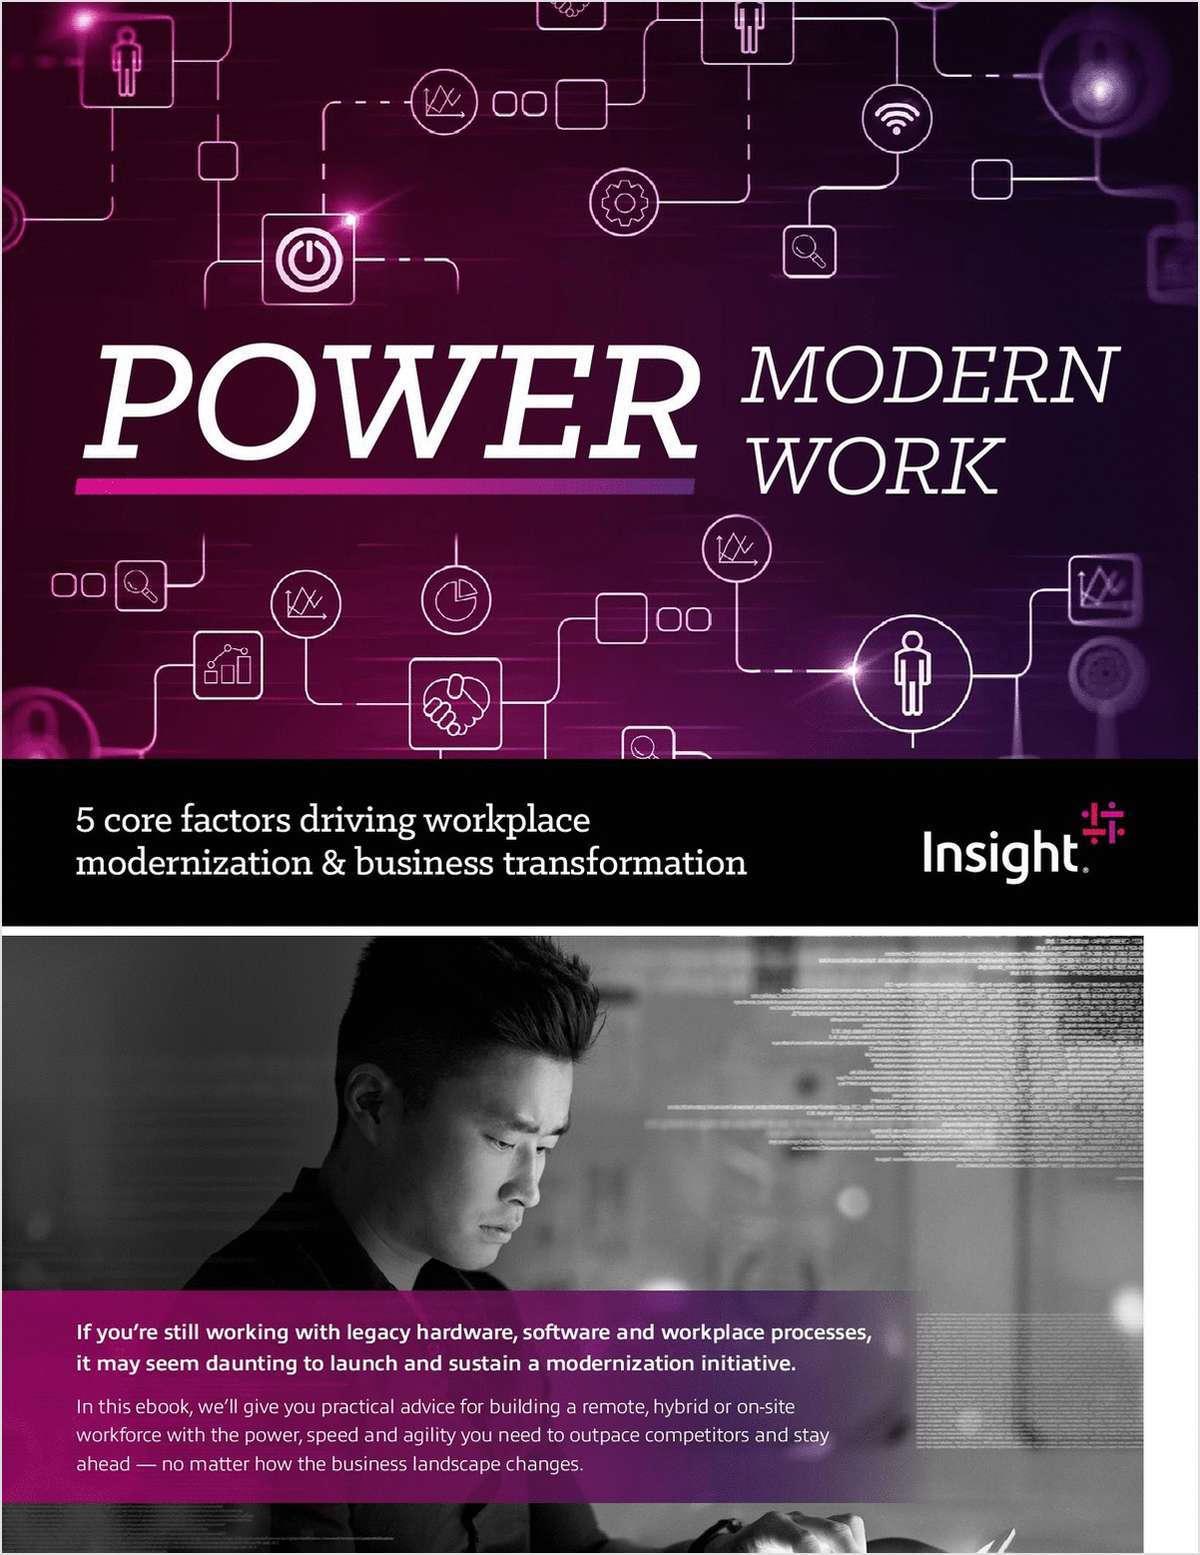 Power Modern Work - brought to you by Insight